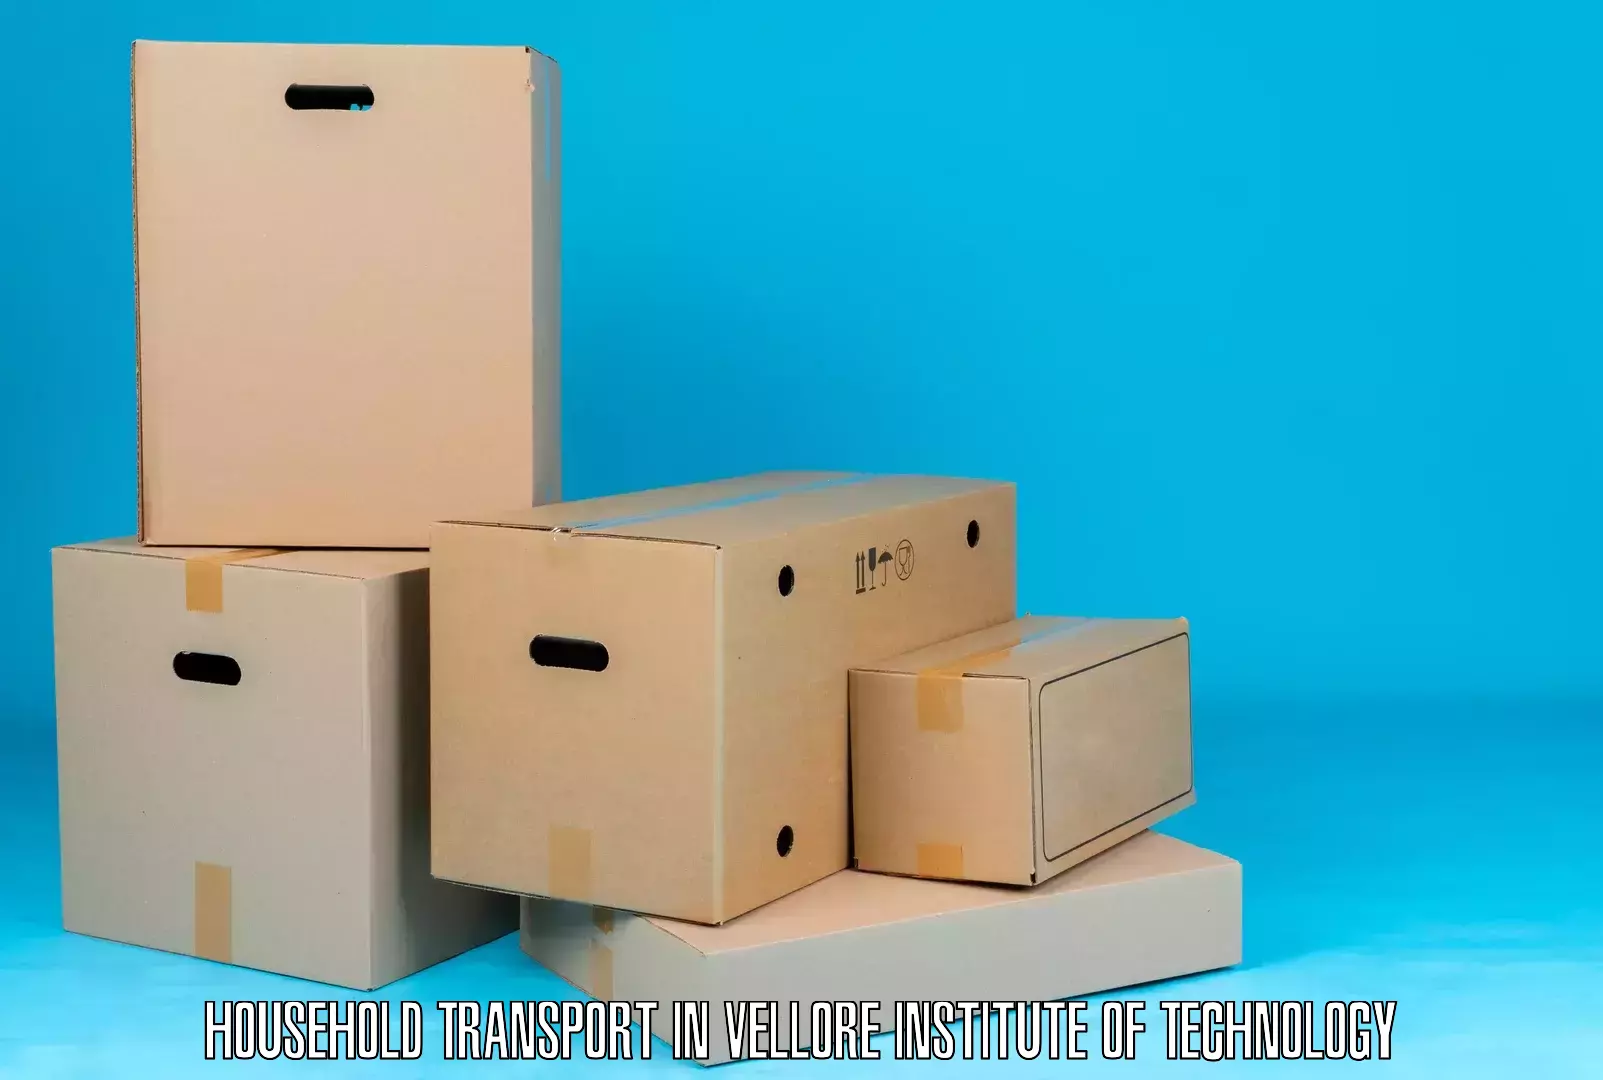 Quality moving services in Vellore Institute of Technology